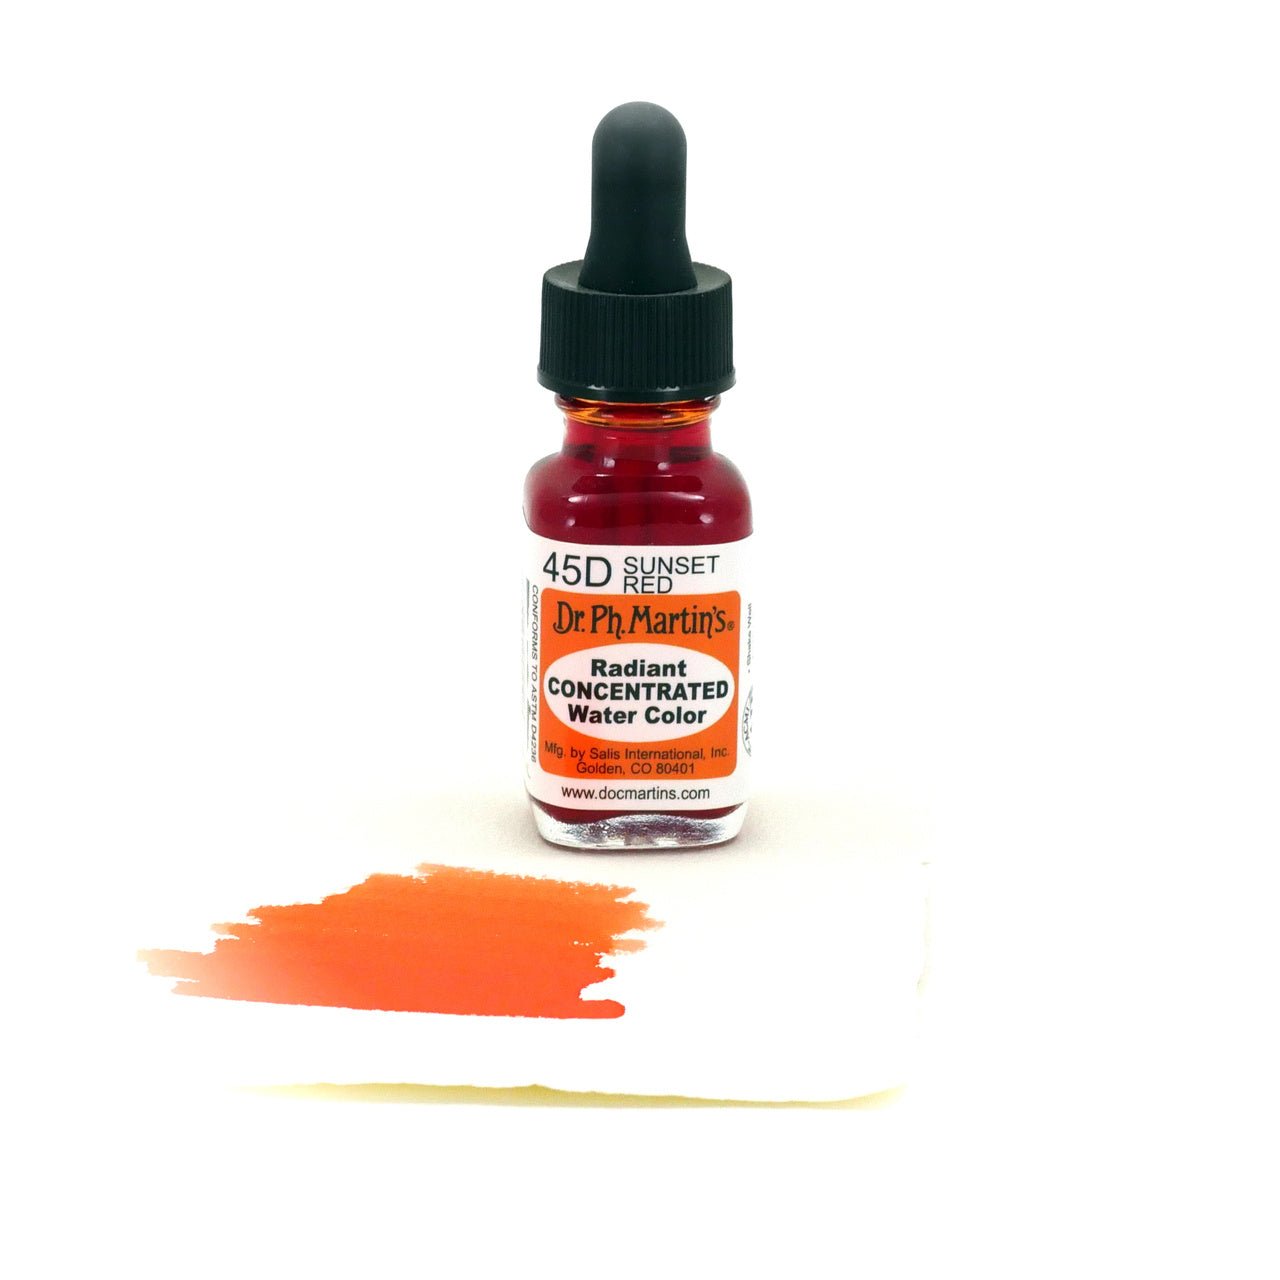 Dr. Ph. Martin's Radiant Watercolor .5 oz - Sunset Red - merriartist.com